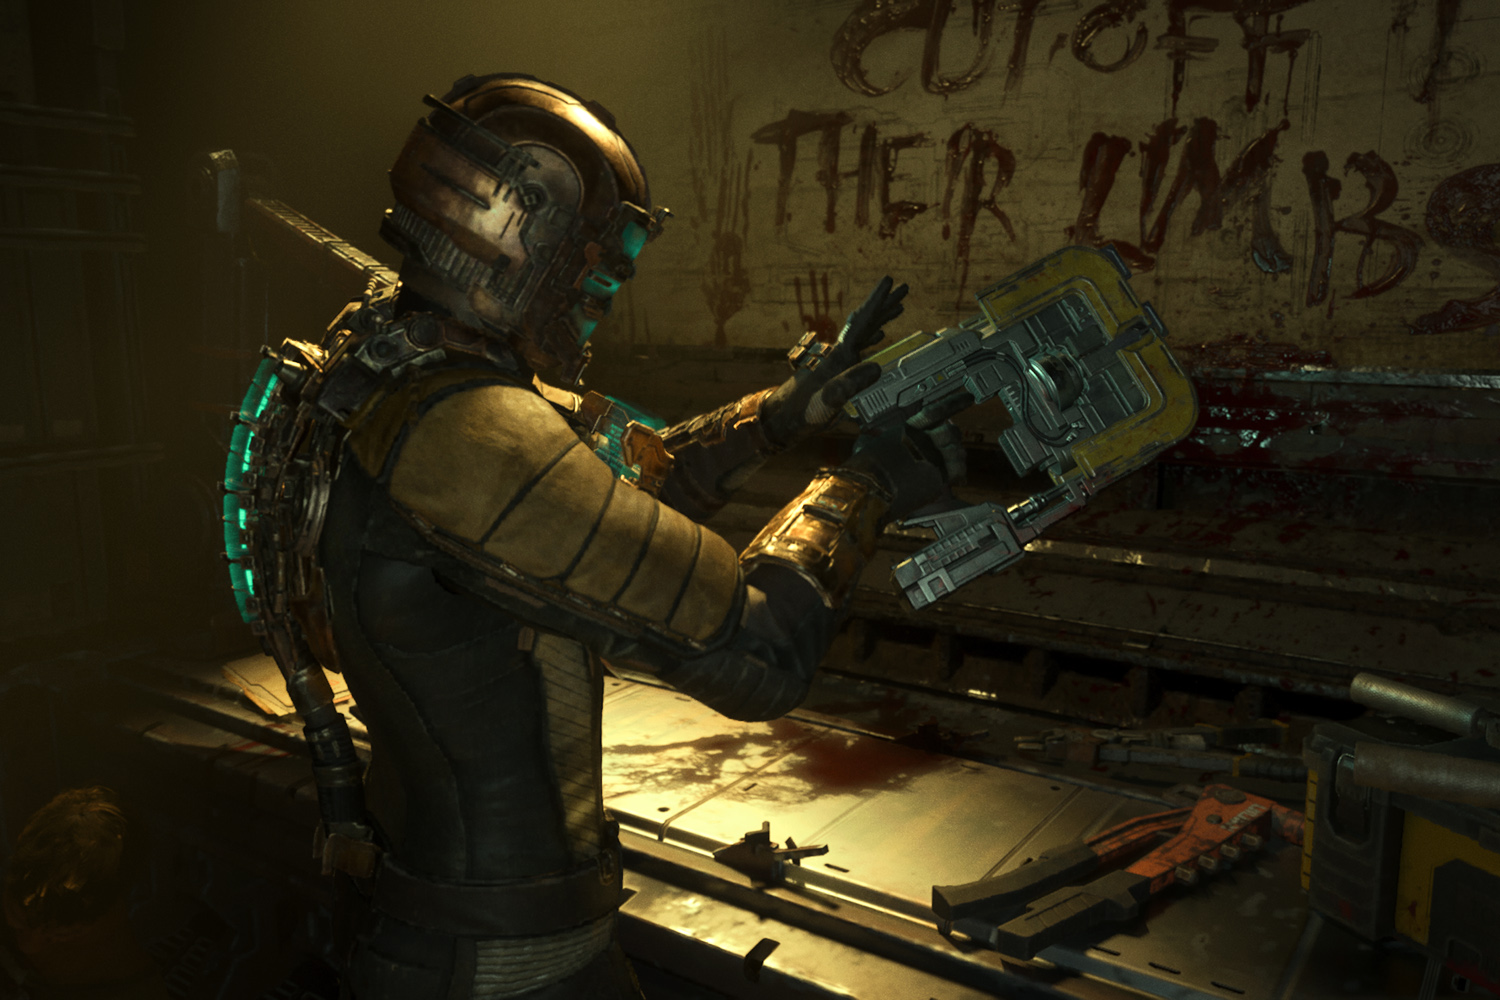 Dead Space remake review: The best the franchise has ever been - Polygon